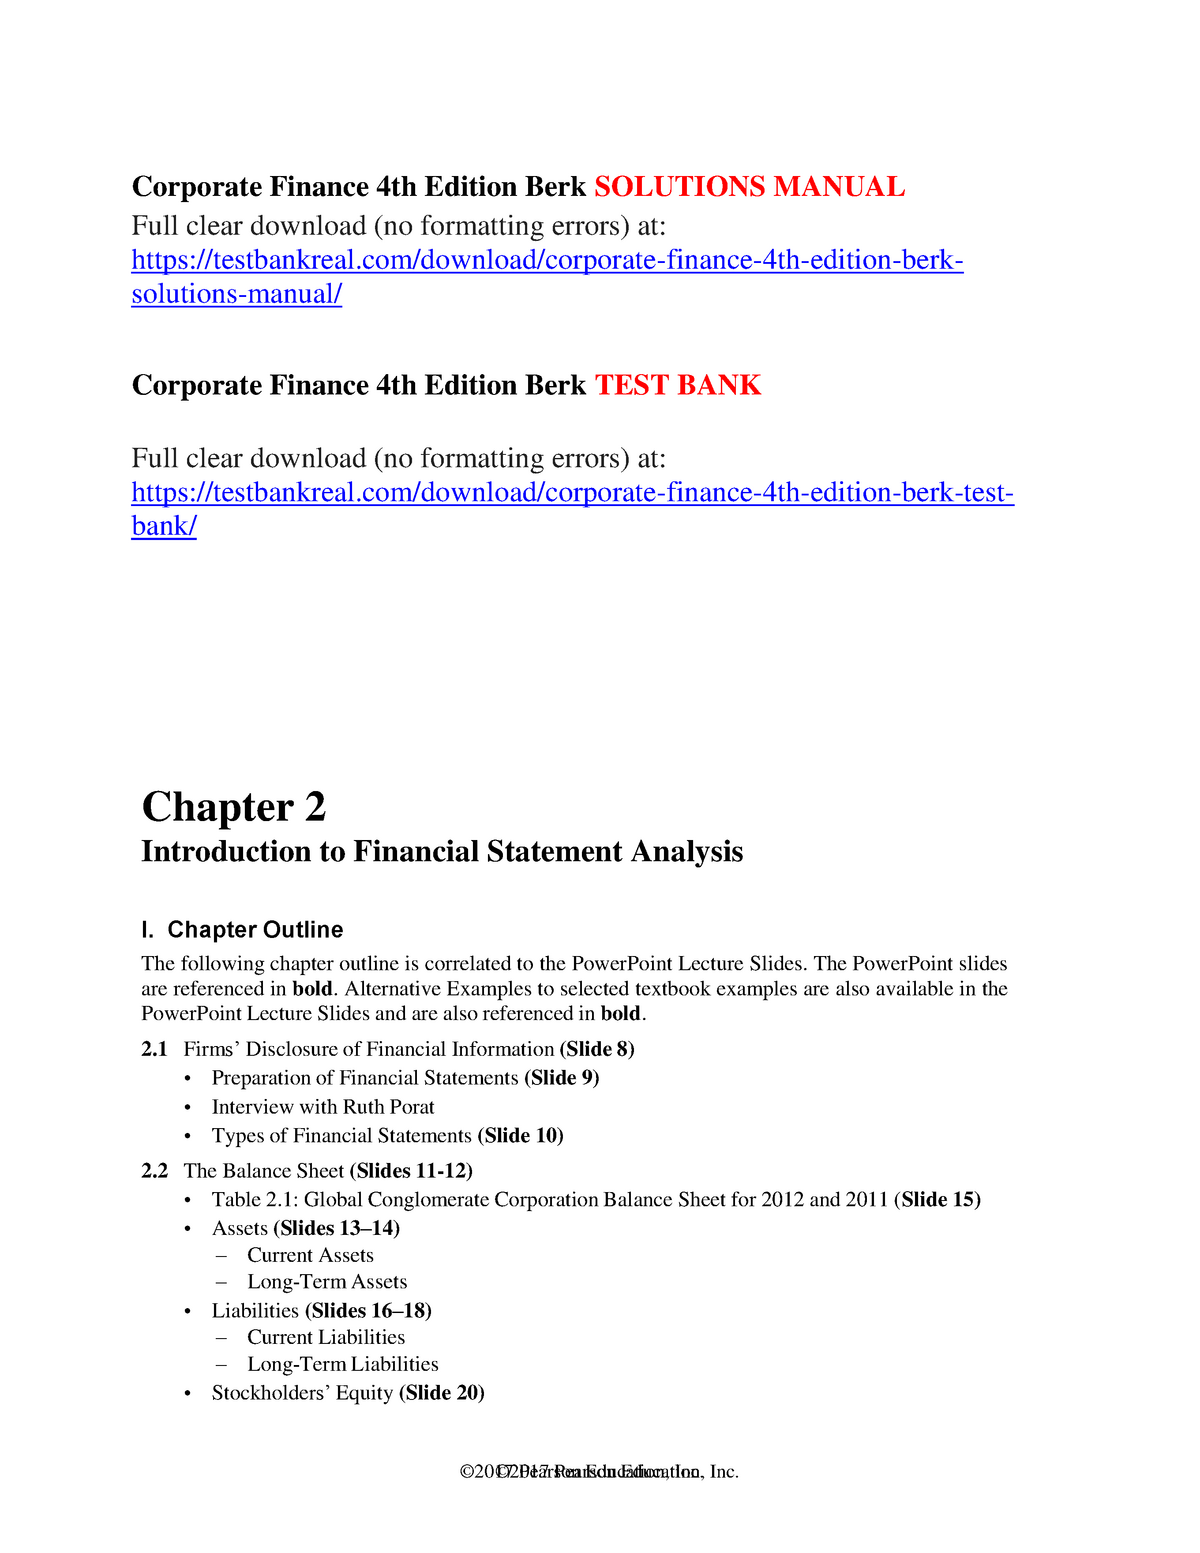 Corporate Finance Pdf Francais / Corporate Publications Saint Gobain / Here we are providing corporate finance book free download.